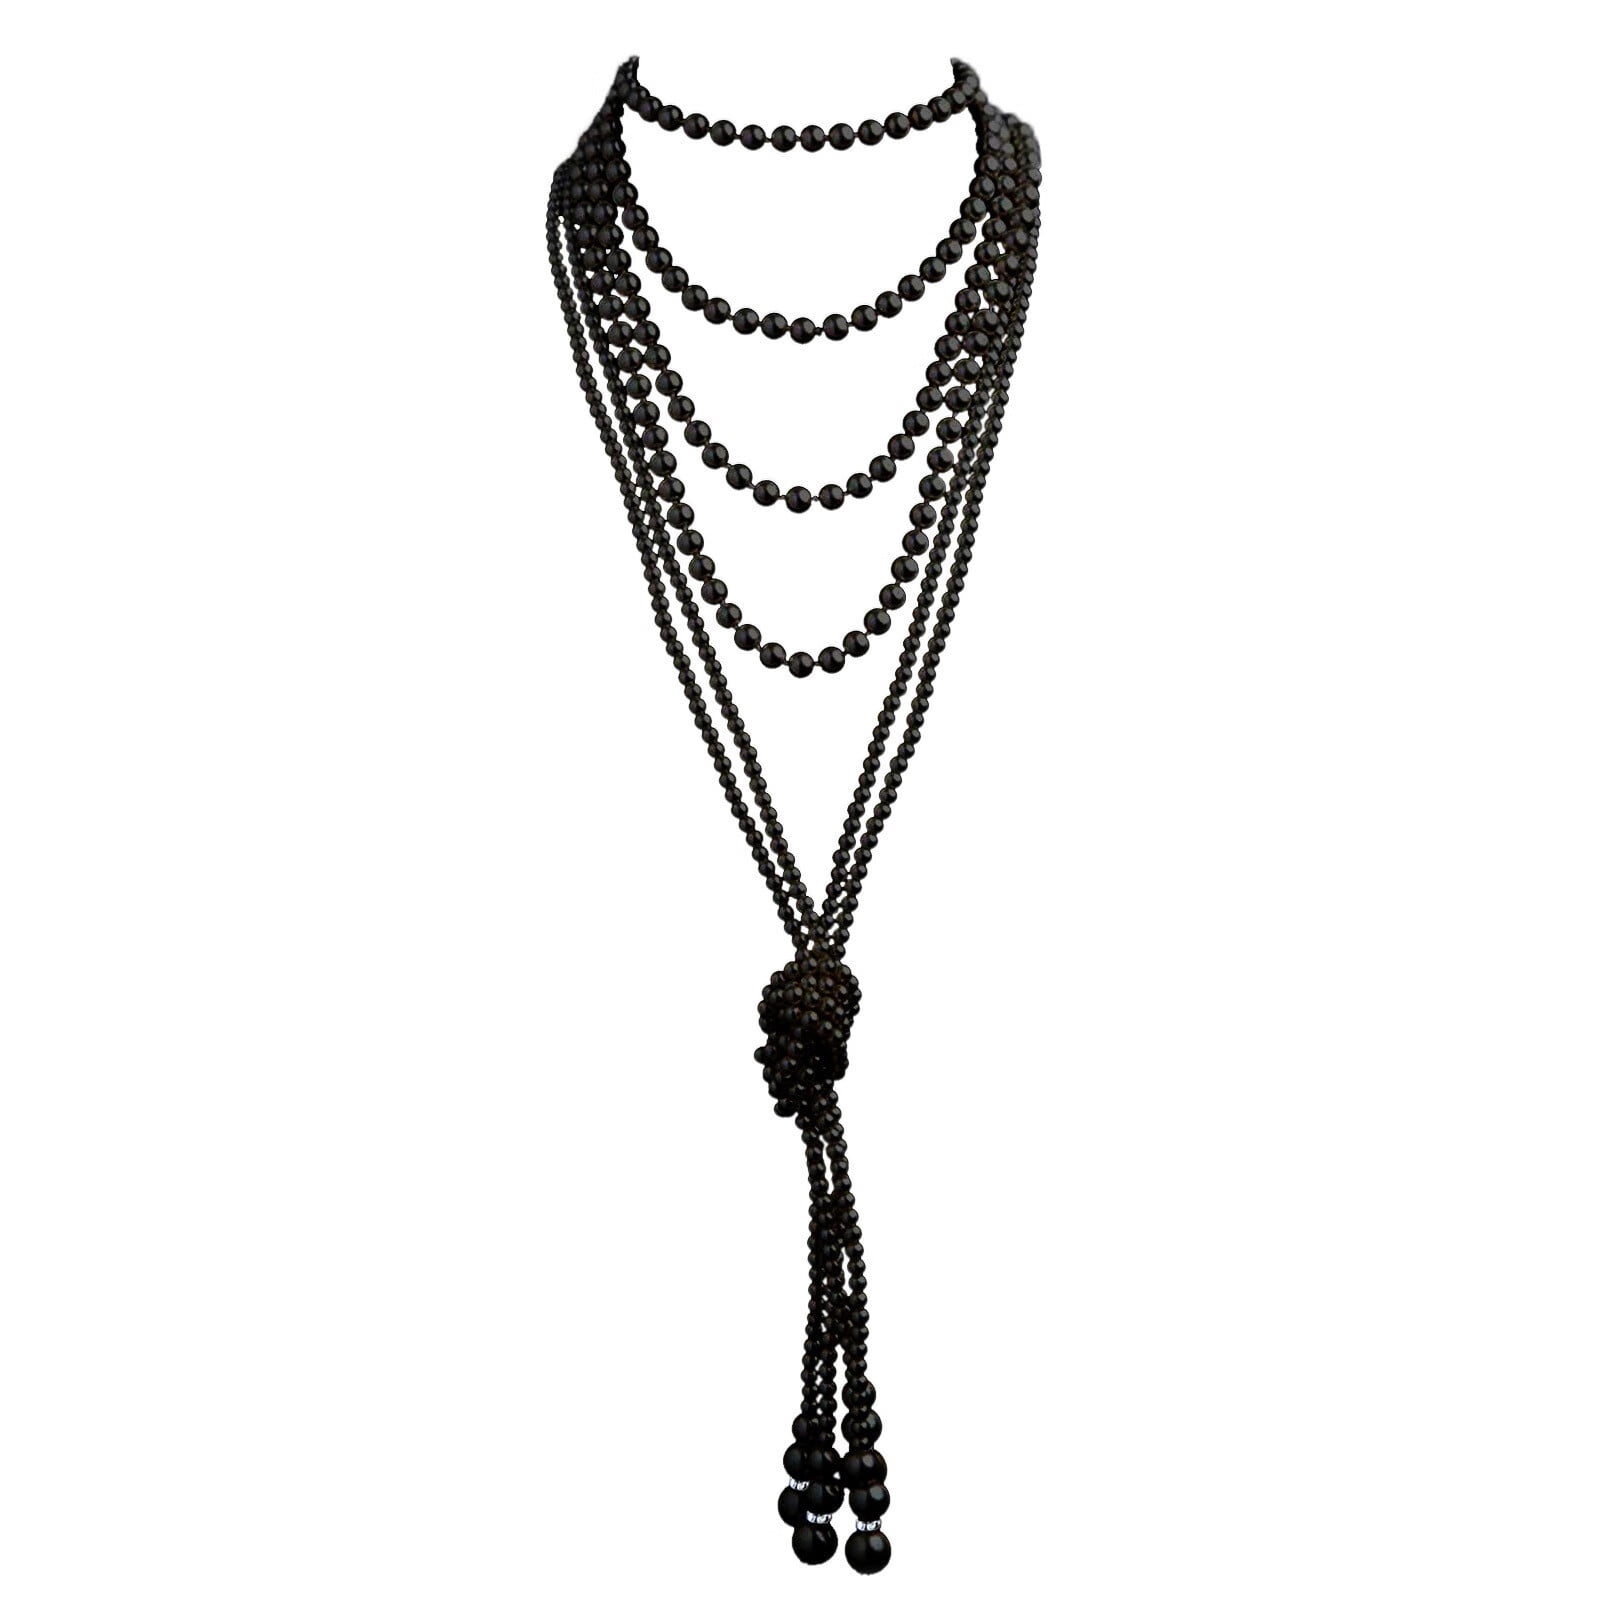 Buy Vintage Style Charcoal Black Long Multitier Beaded Womens Necklace  Jewelry - 1920's Charleston Colection, Long Y Necklace, Larait Necklace,  Cubic Zirconia Stainless Steel, Cubic Zirconia at Amazon.in